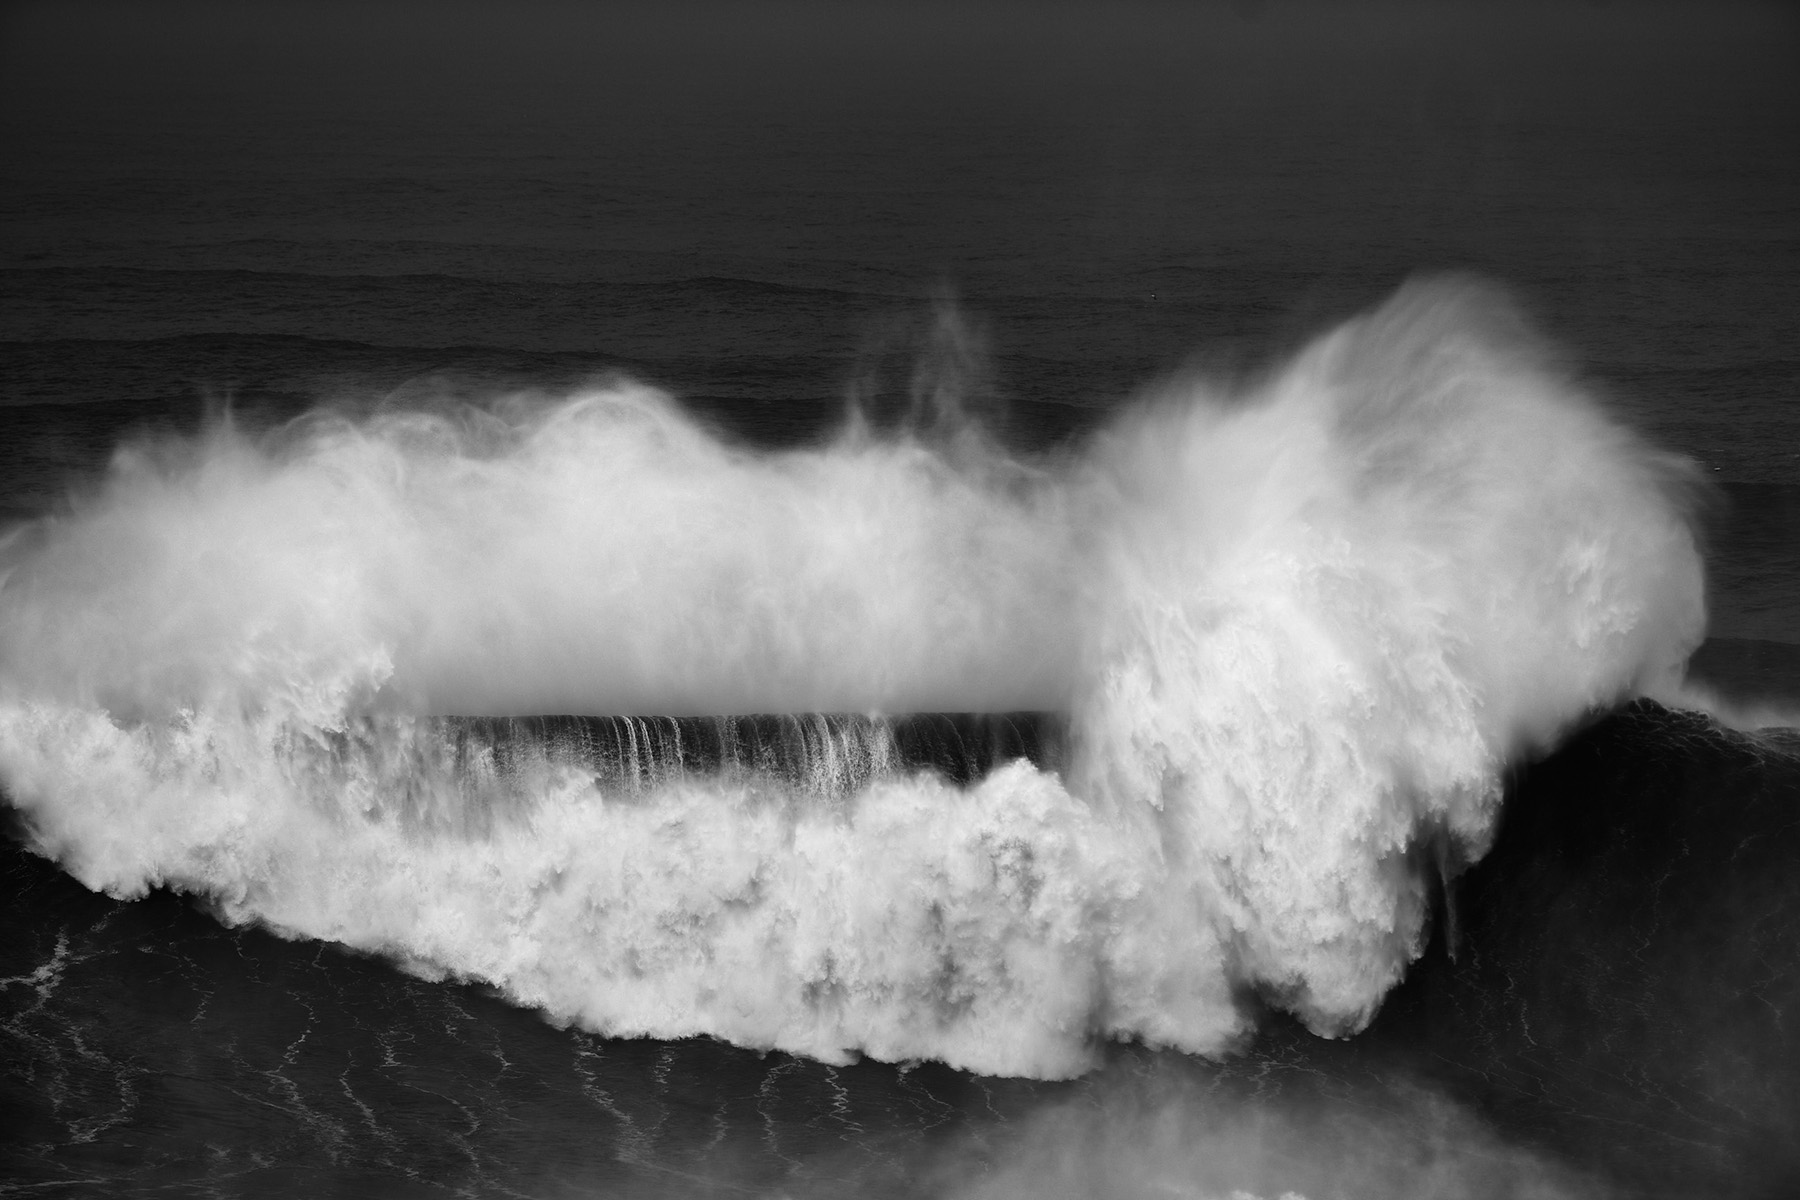 fine art photography of wild and stormy seascapes in the Atlantic Ocean